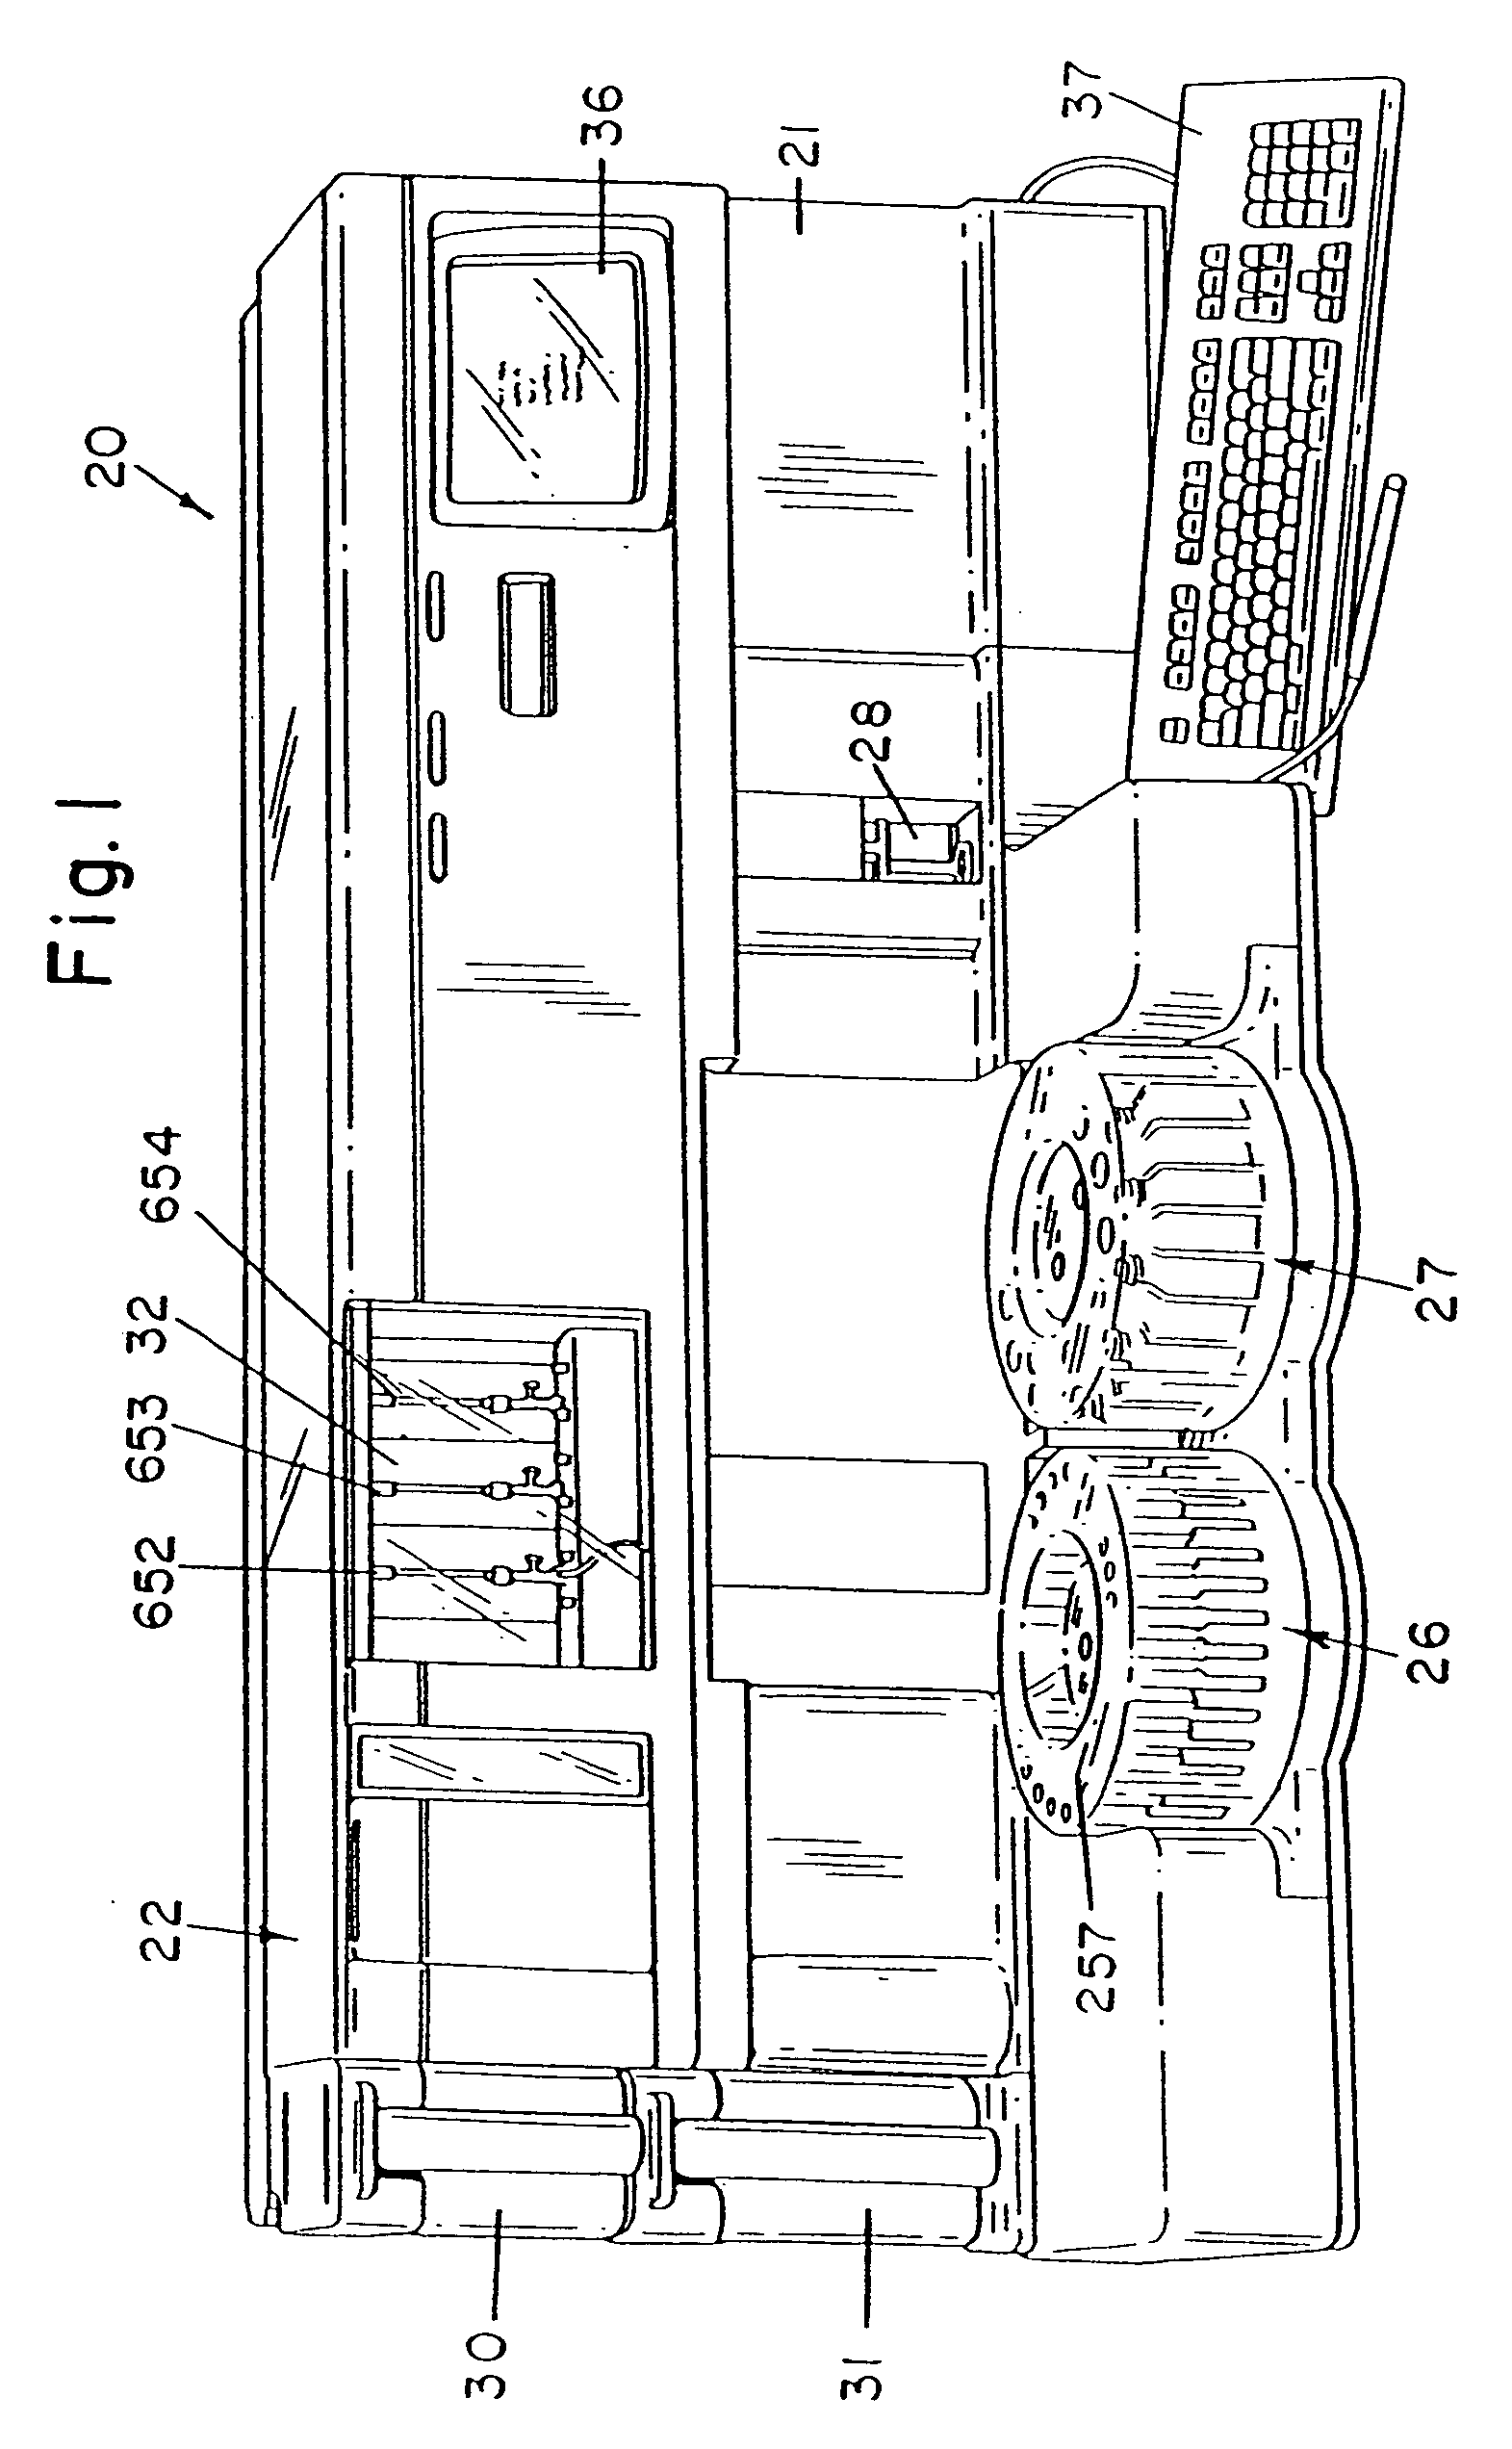 Fluid handling apparatus for an automated analyzer